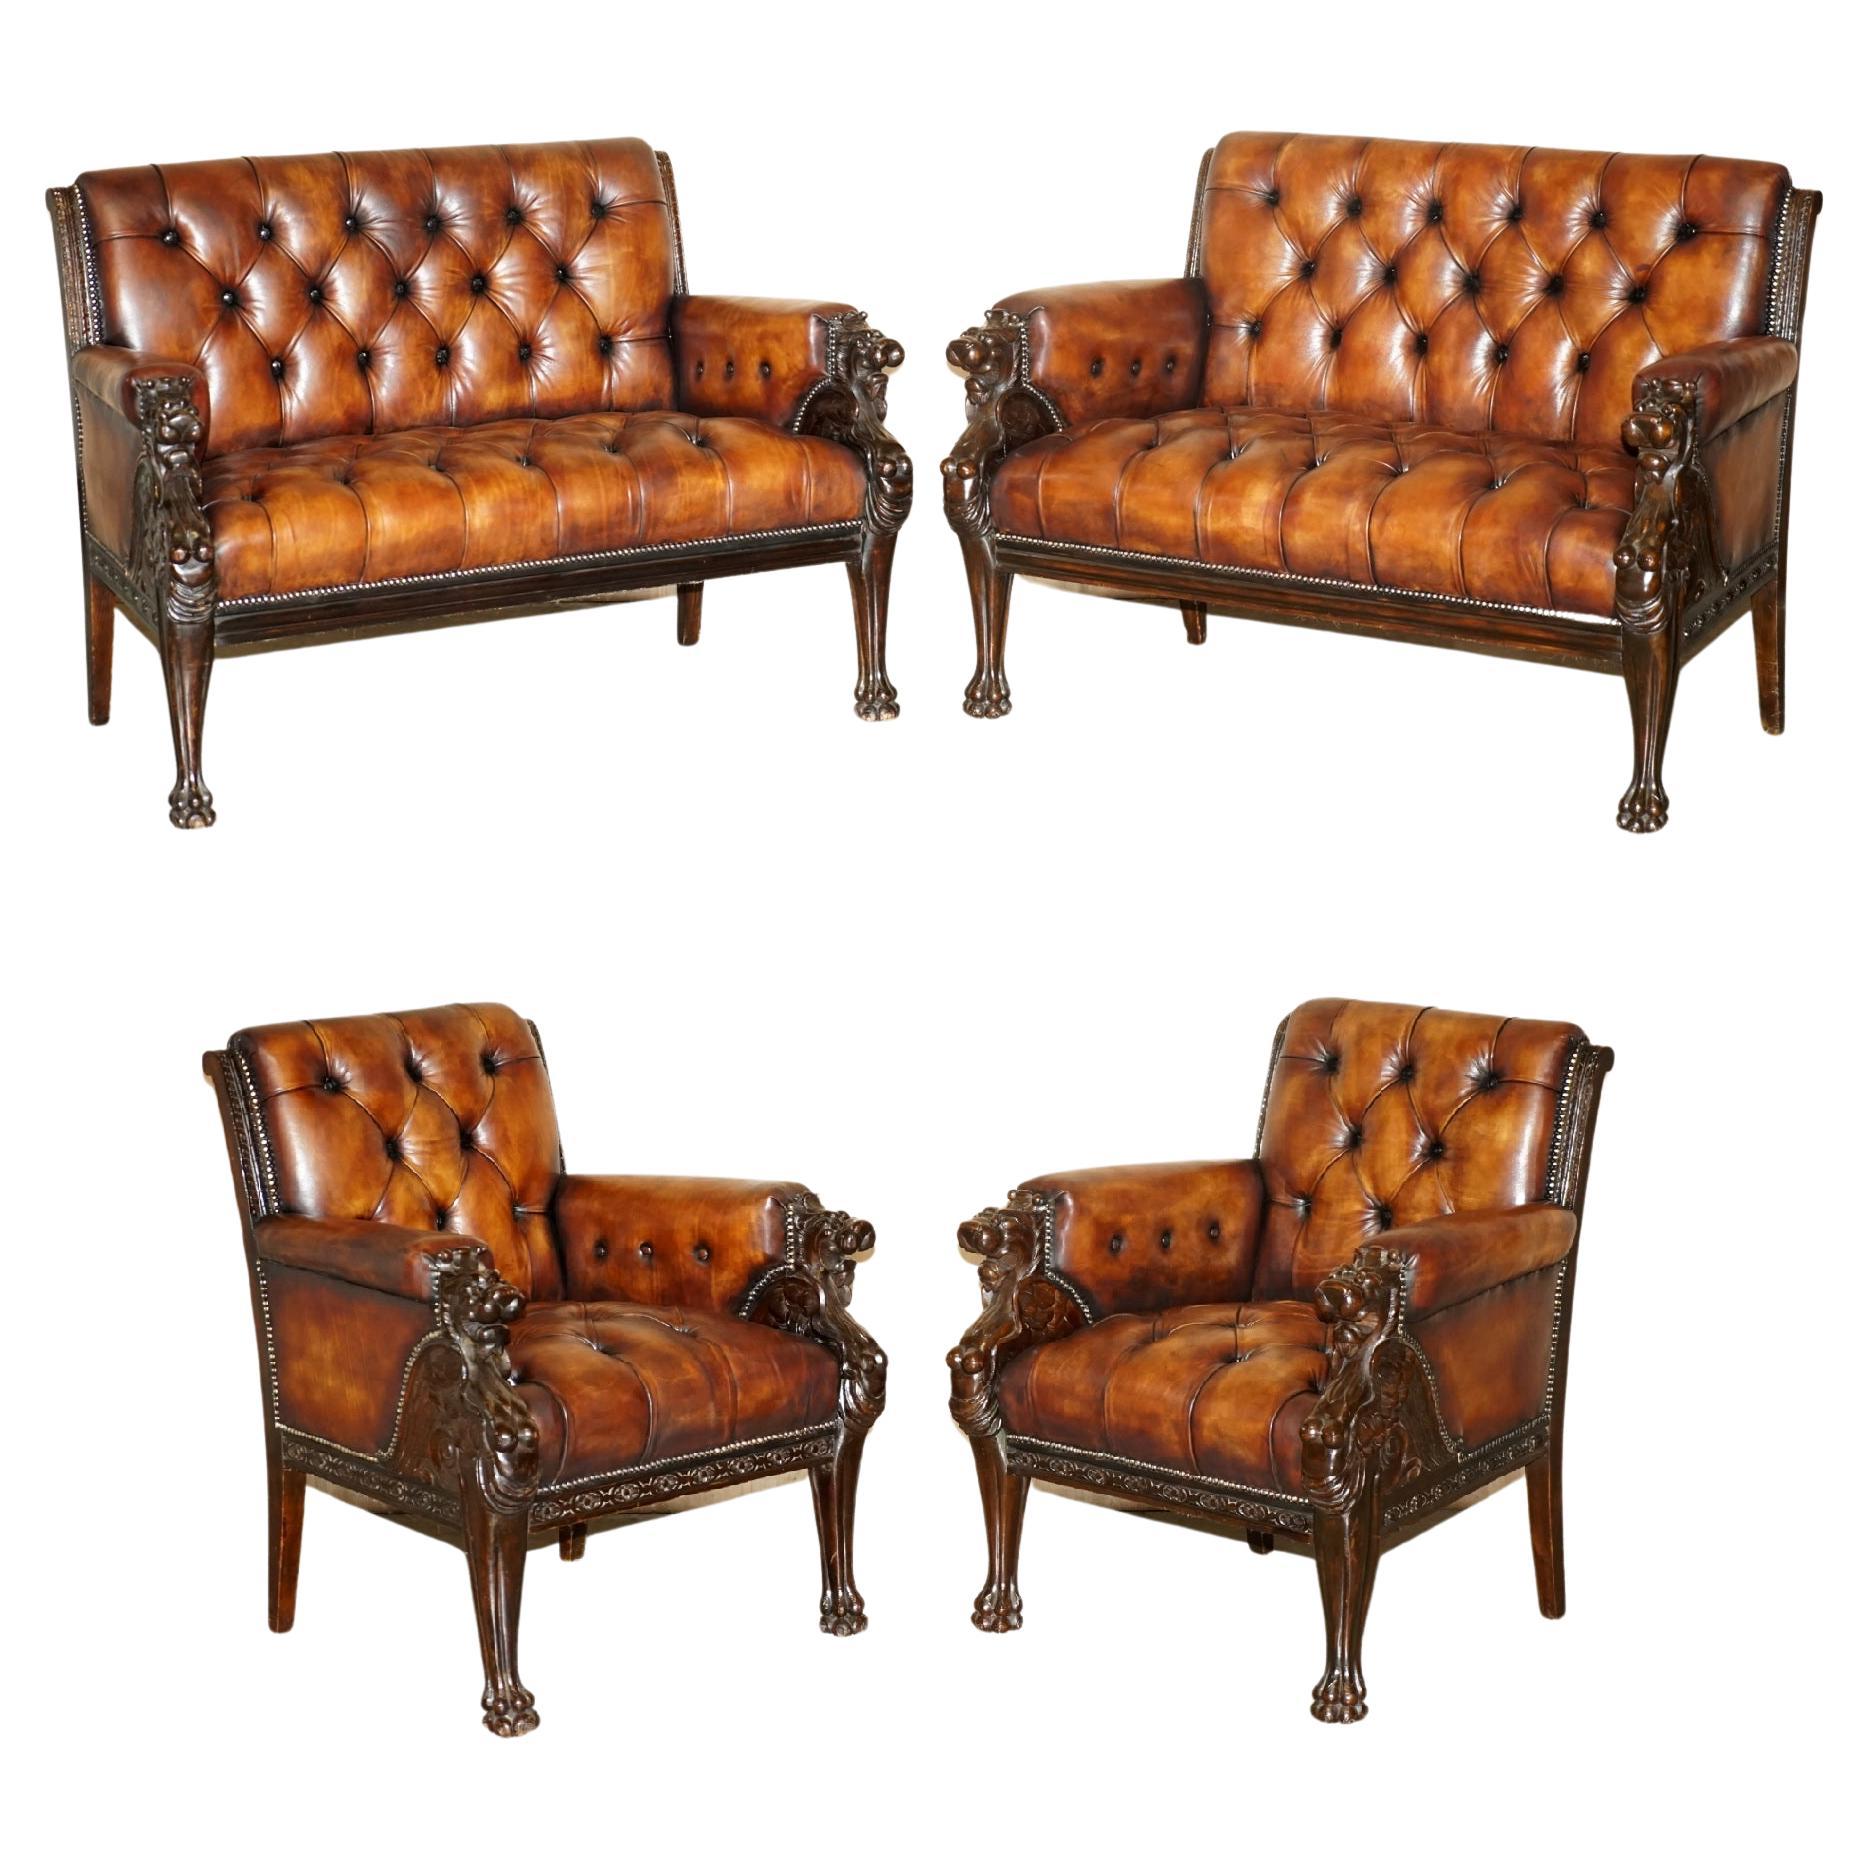 Restored Antique Lion Hand Carved Brown Leather Chesterfield Sofa Armchair Suite For Sale